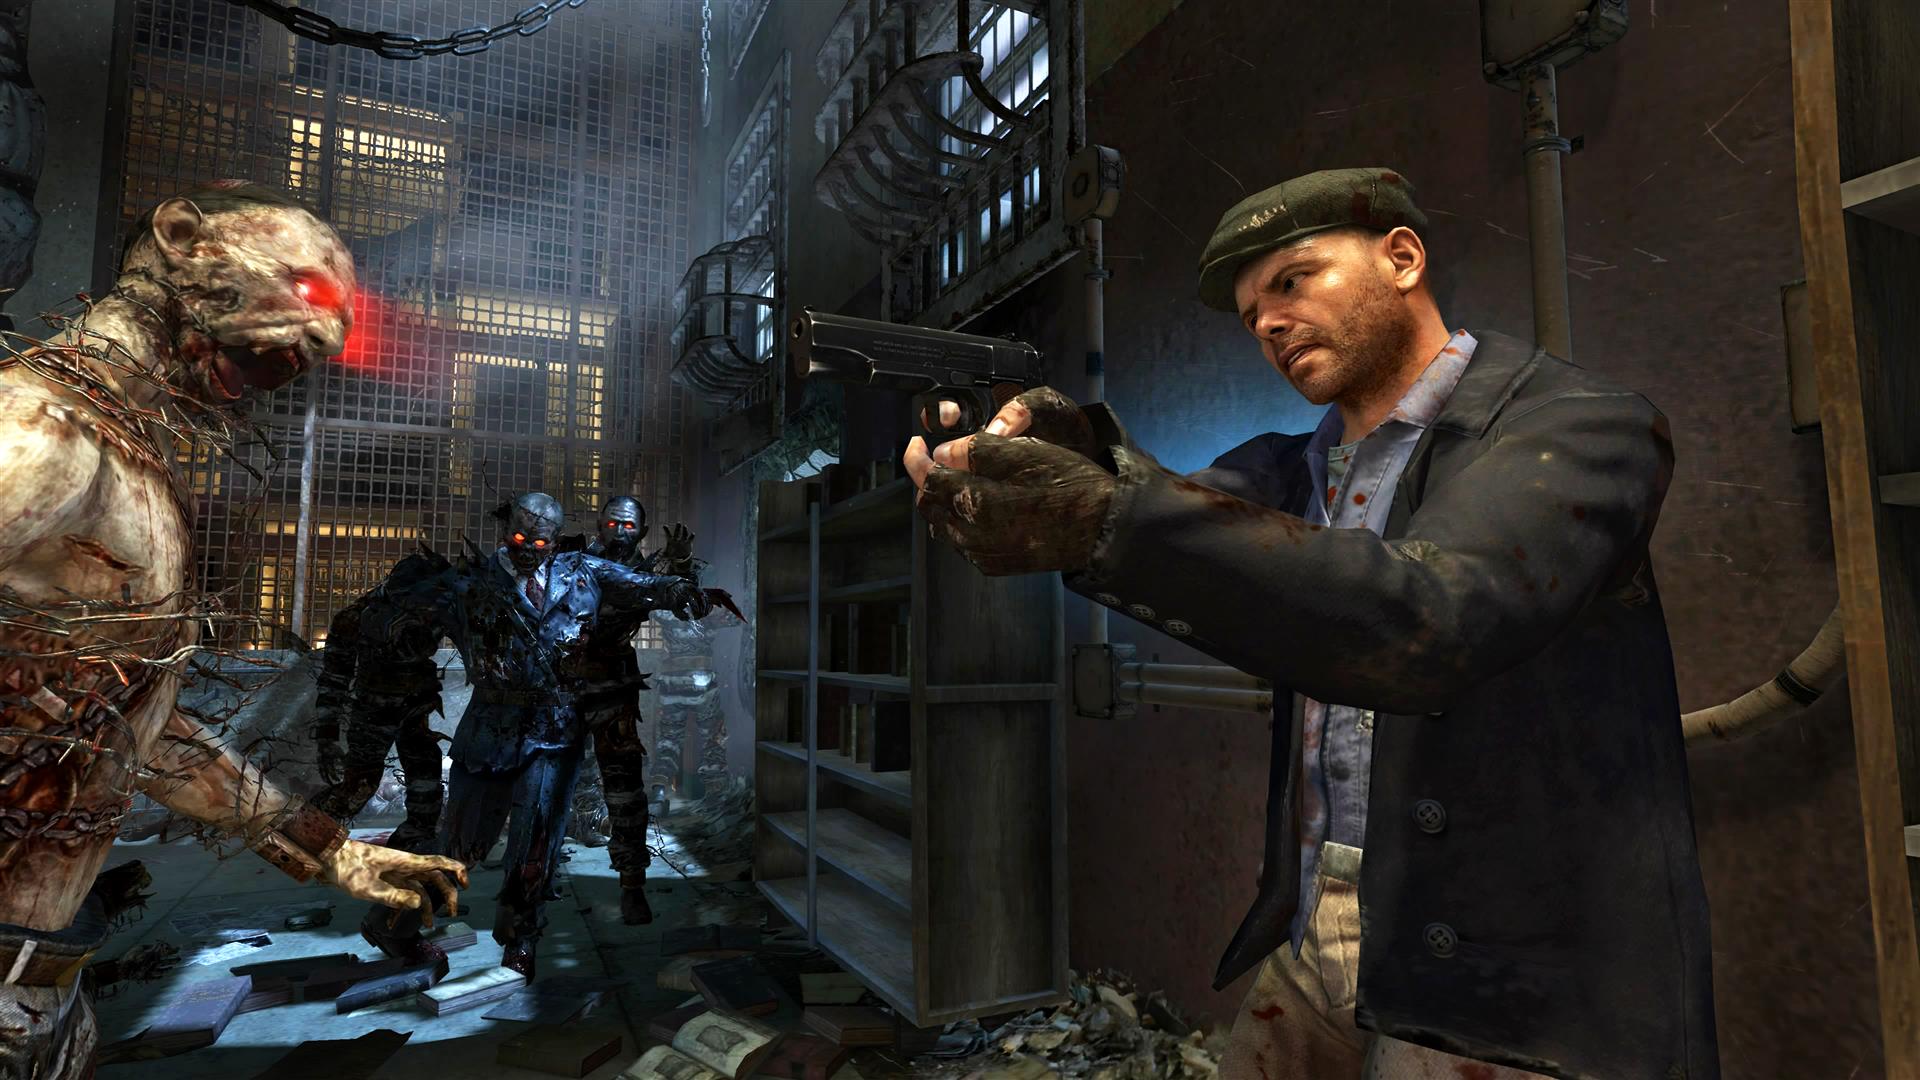 Black Ops 2 Uprising Dlc Debuts On Today With Mob Of The Dead Mode So Check Out These Screenshots Neoseeker